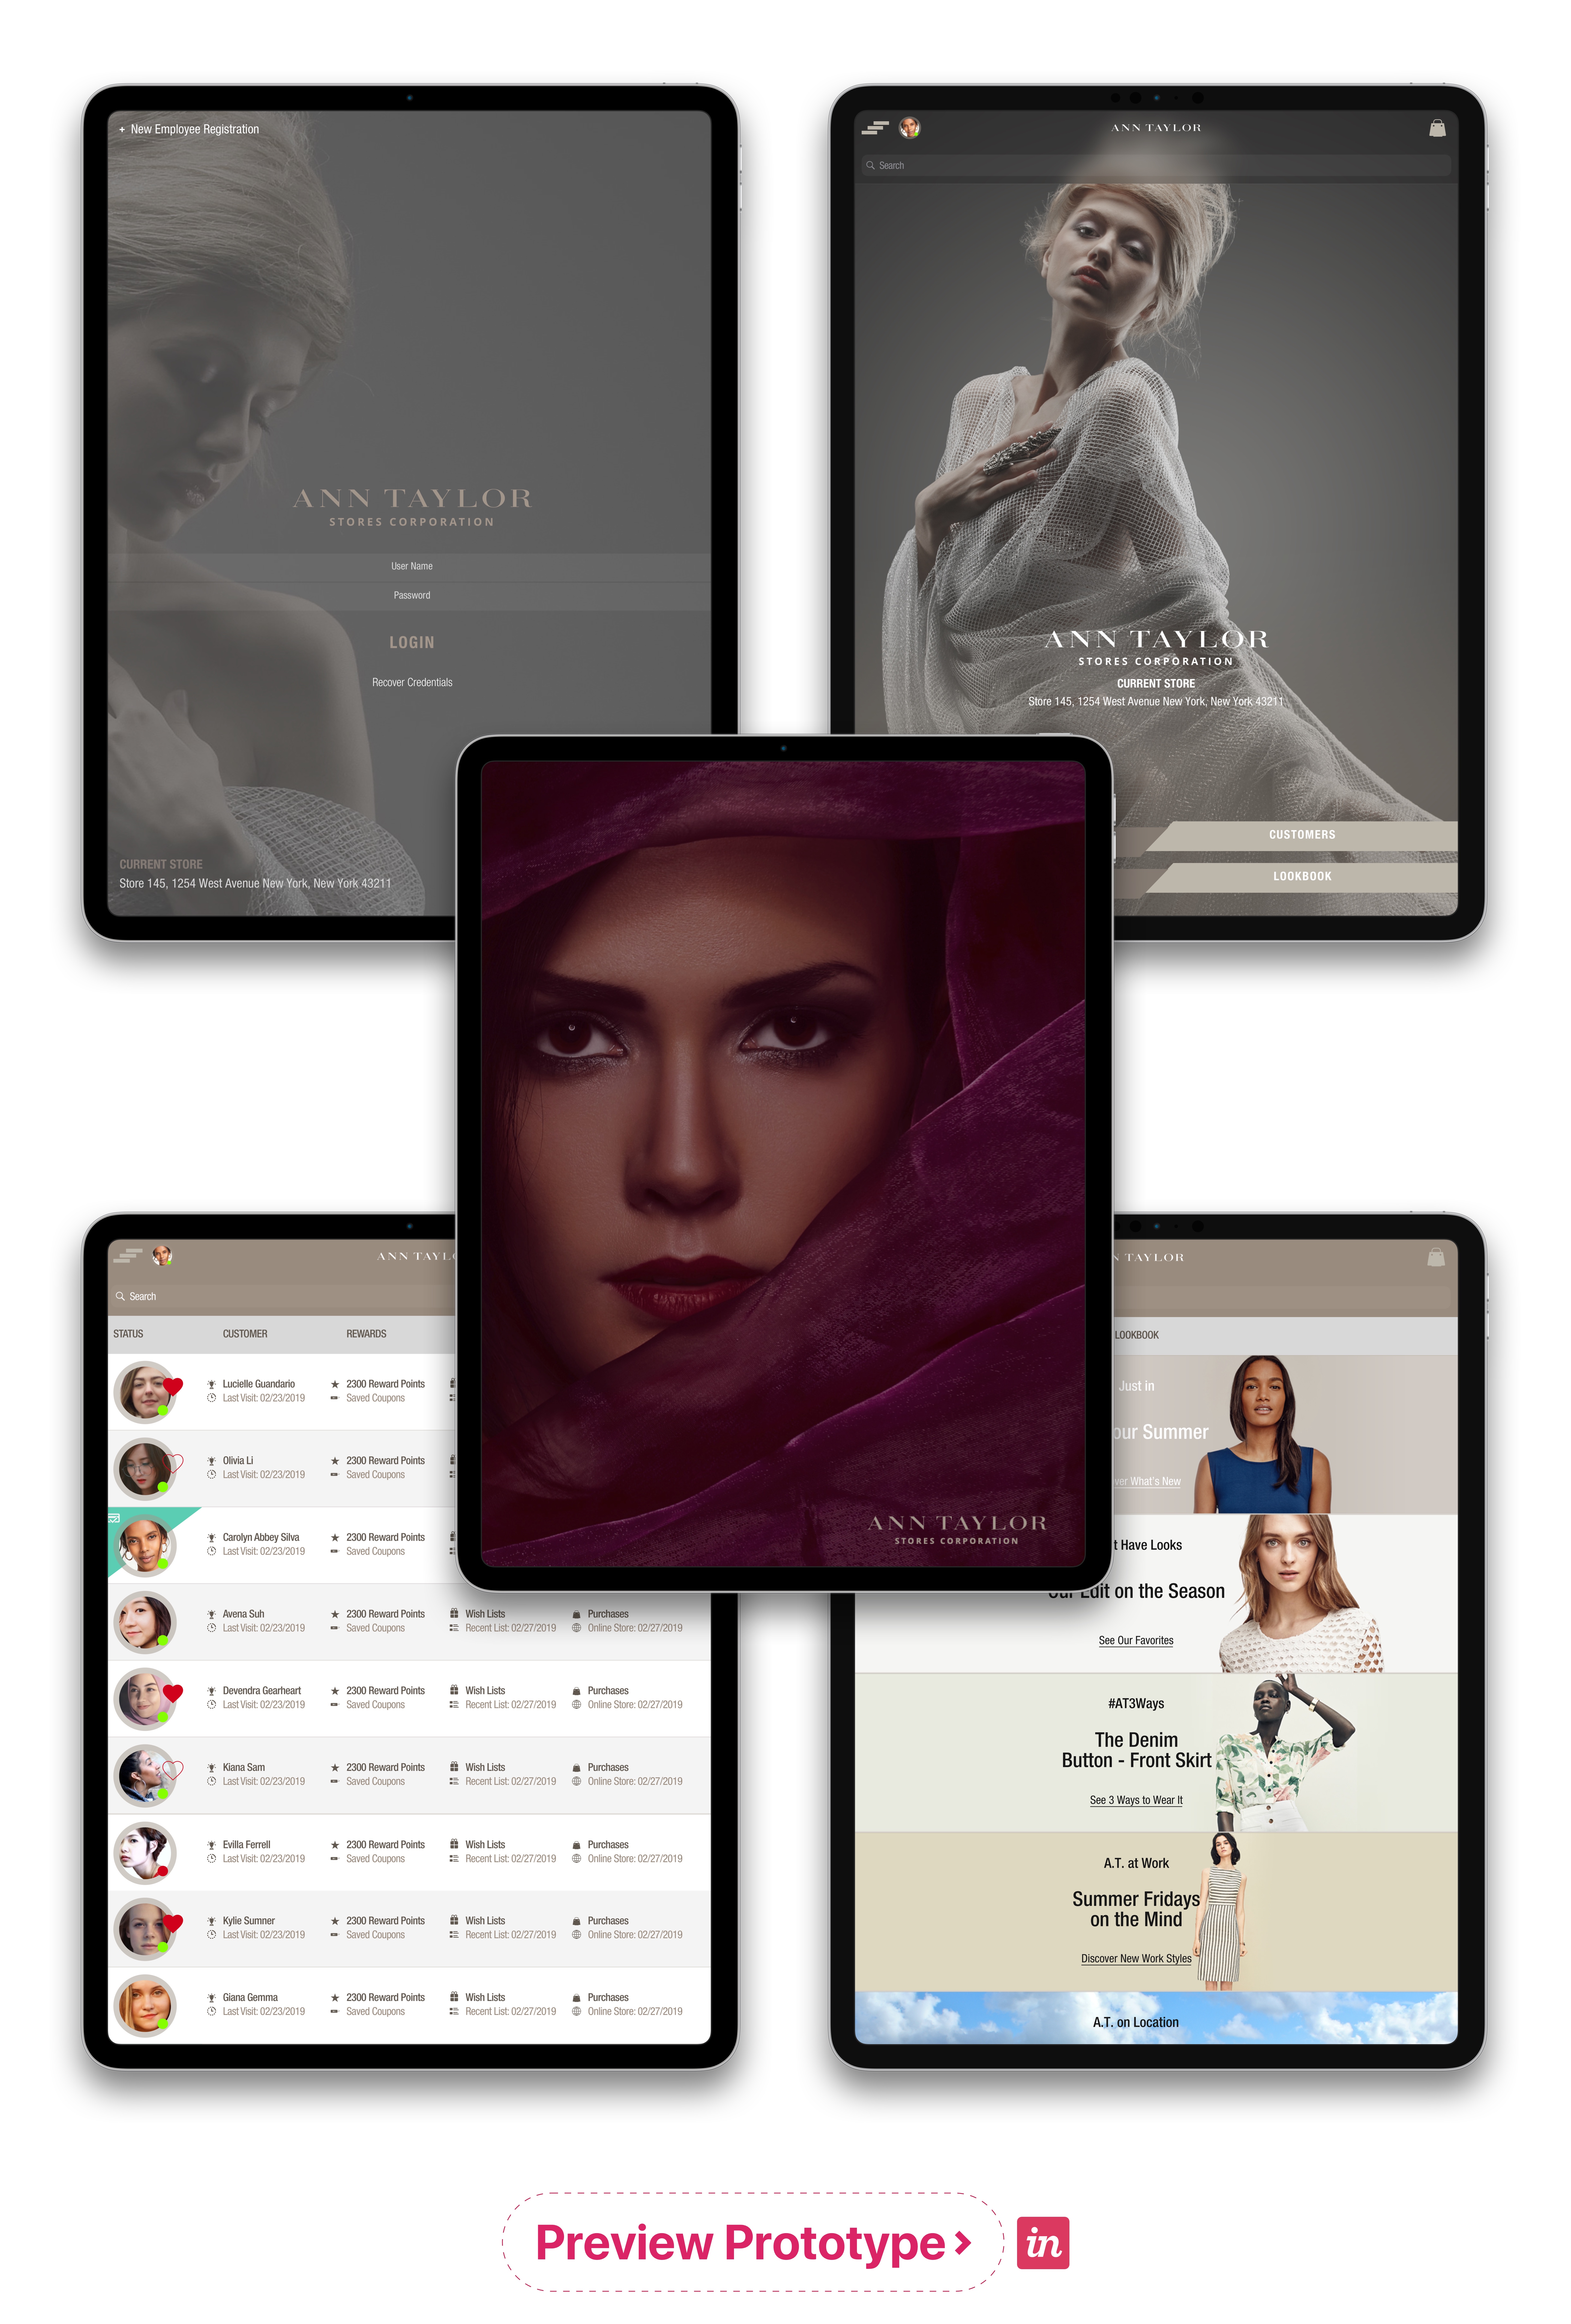 Ann Taylor UX Tablet by Moera Creative